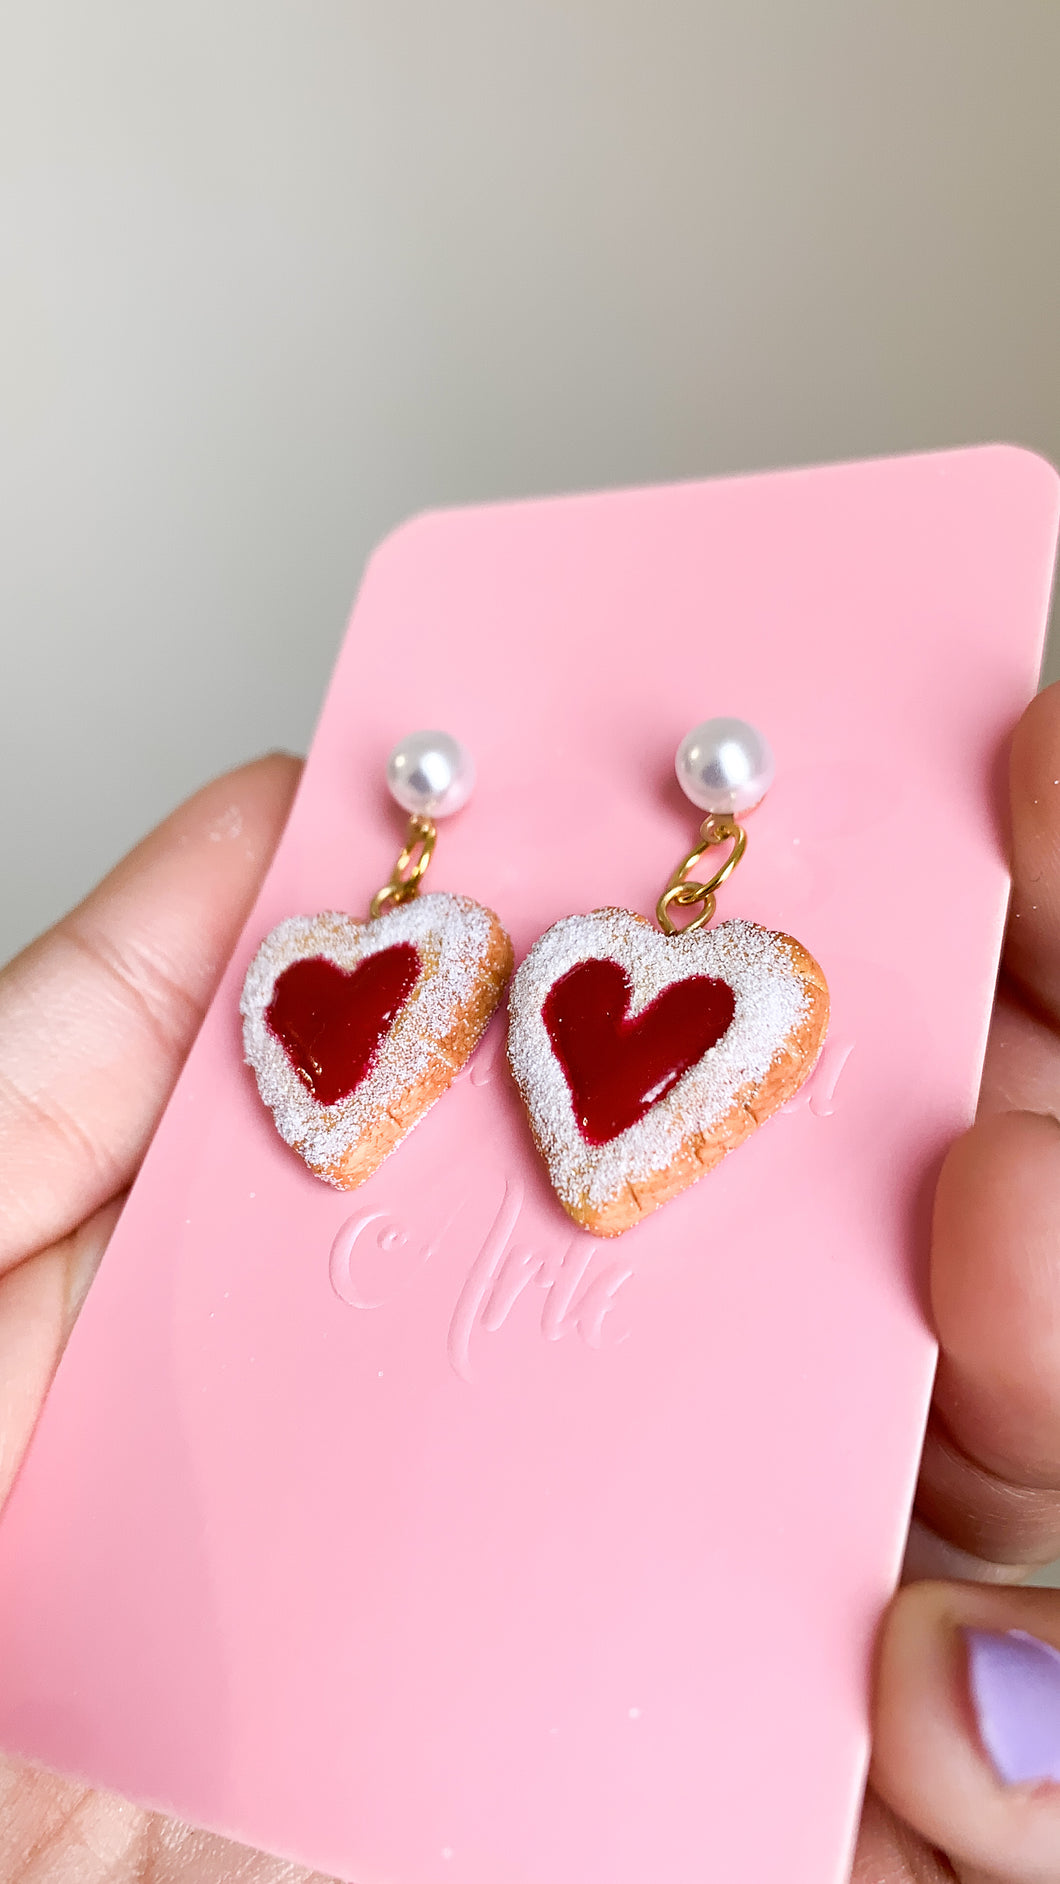 Small jam biscuit earrings